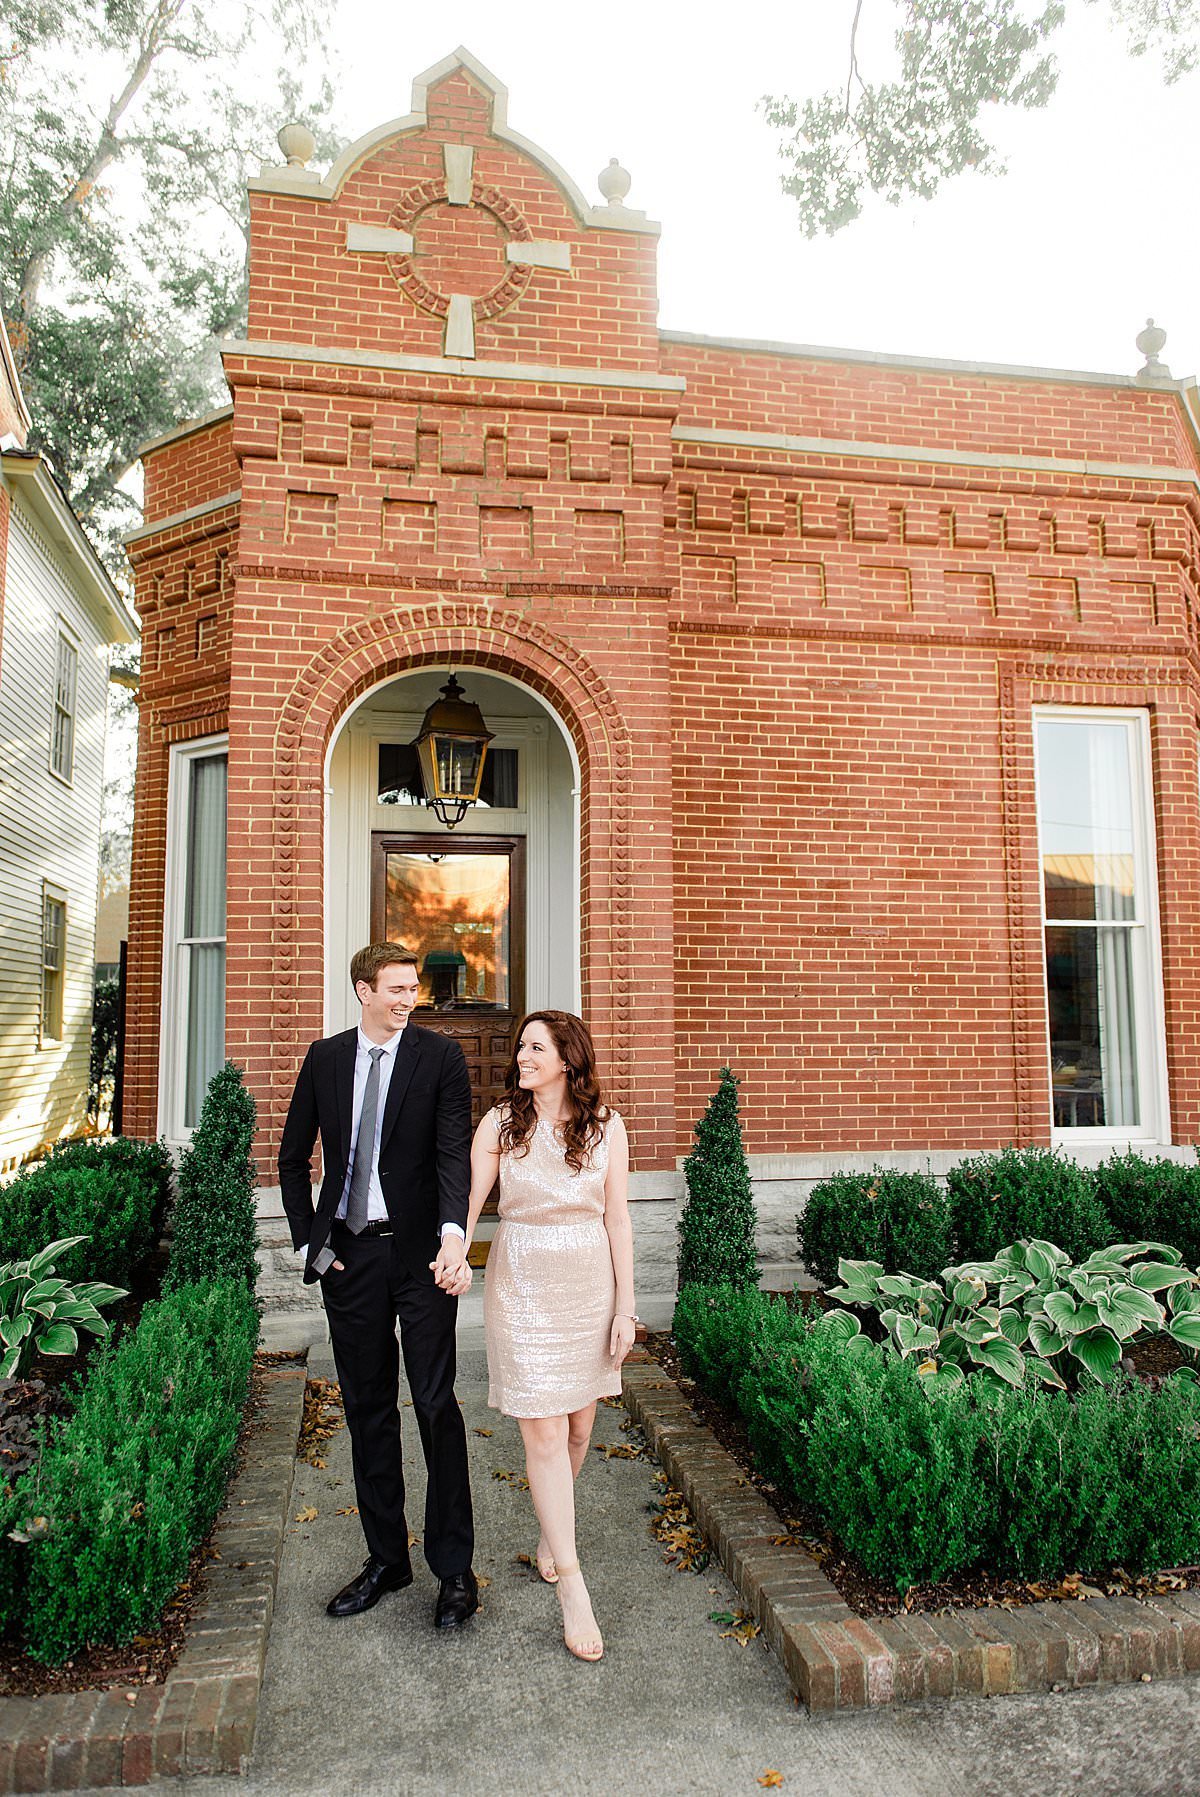 Couple photoshoot outside historic brick building in Franklin, she's wearing a knee length rose gold sequin dress and he is in a suit